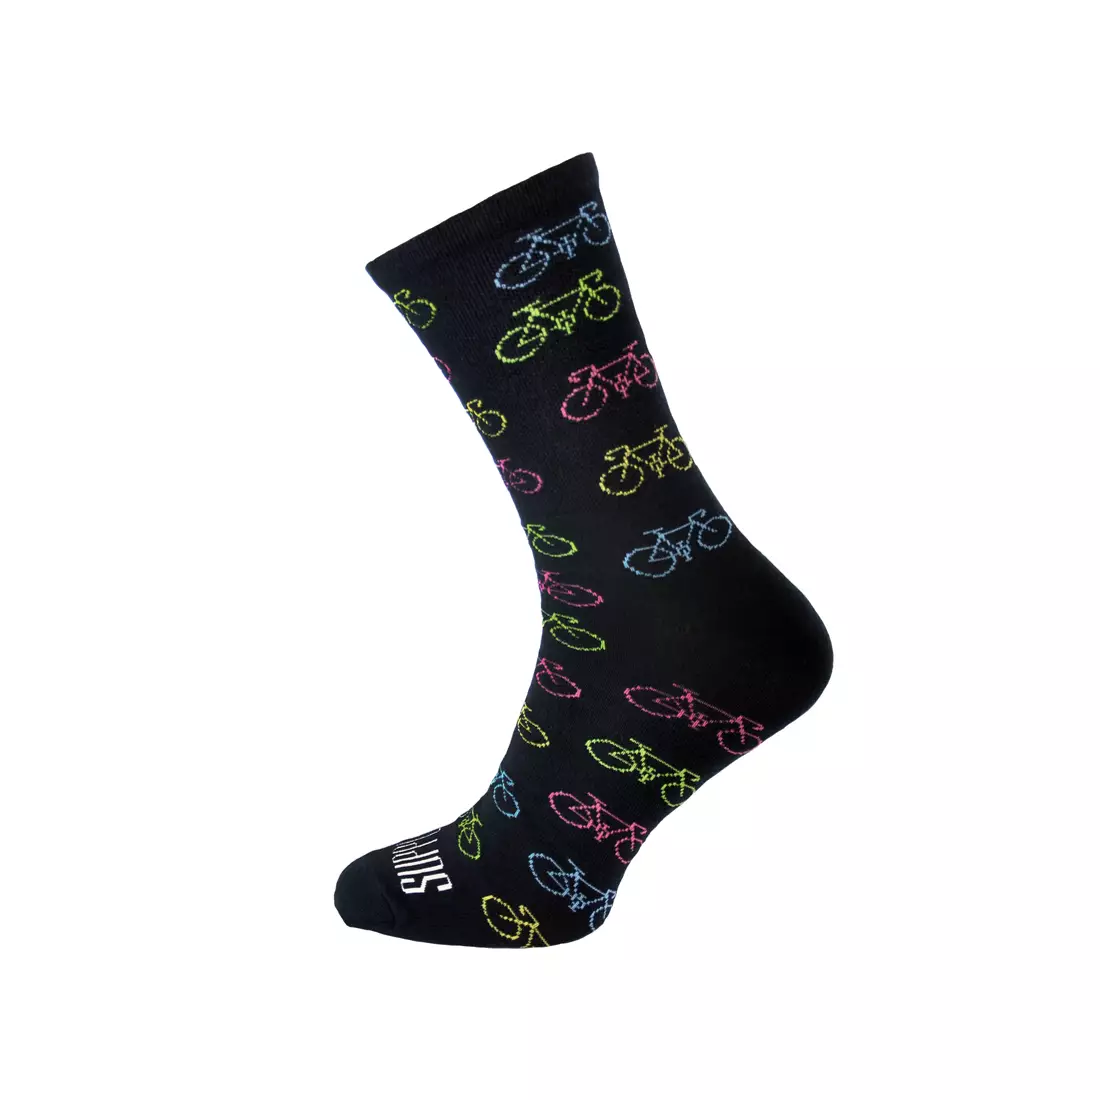 SUPPORTSPORT socks CYCLING PASSION black